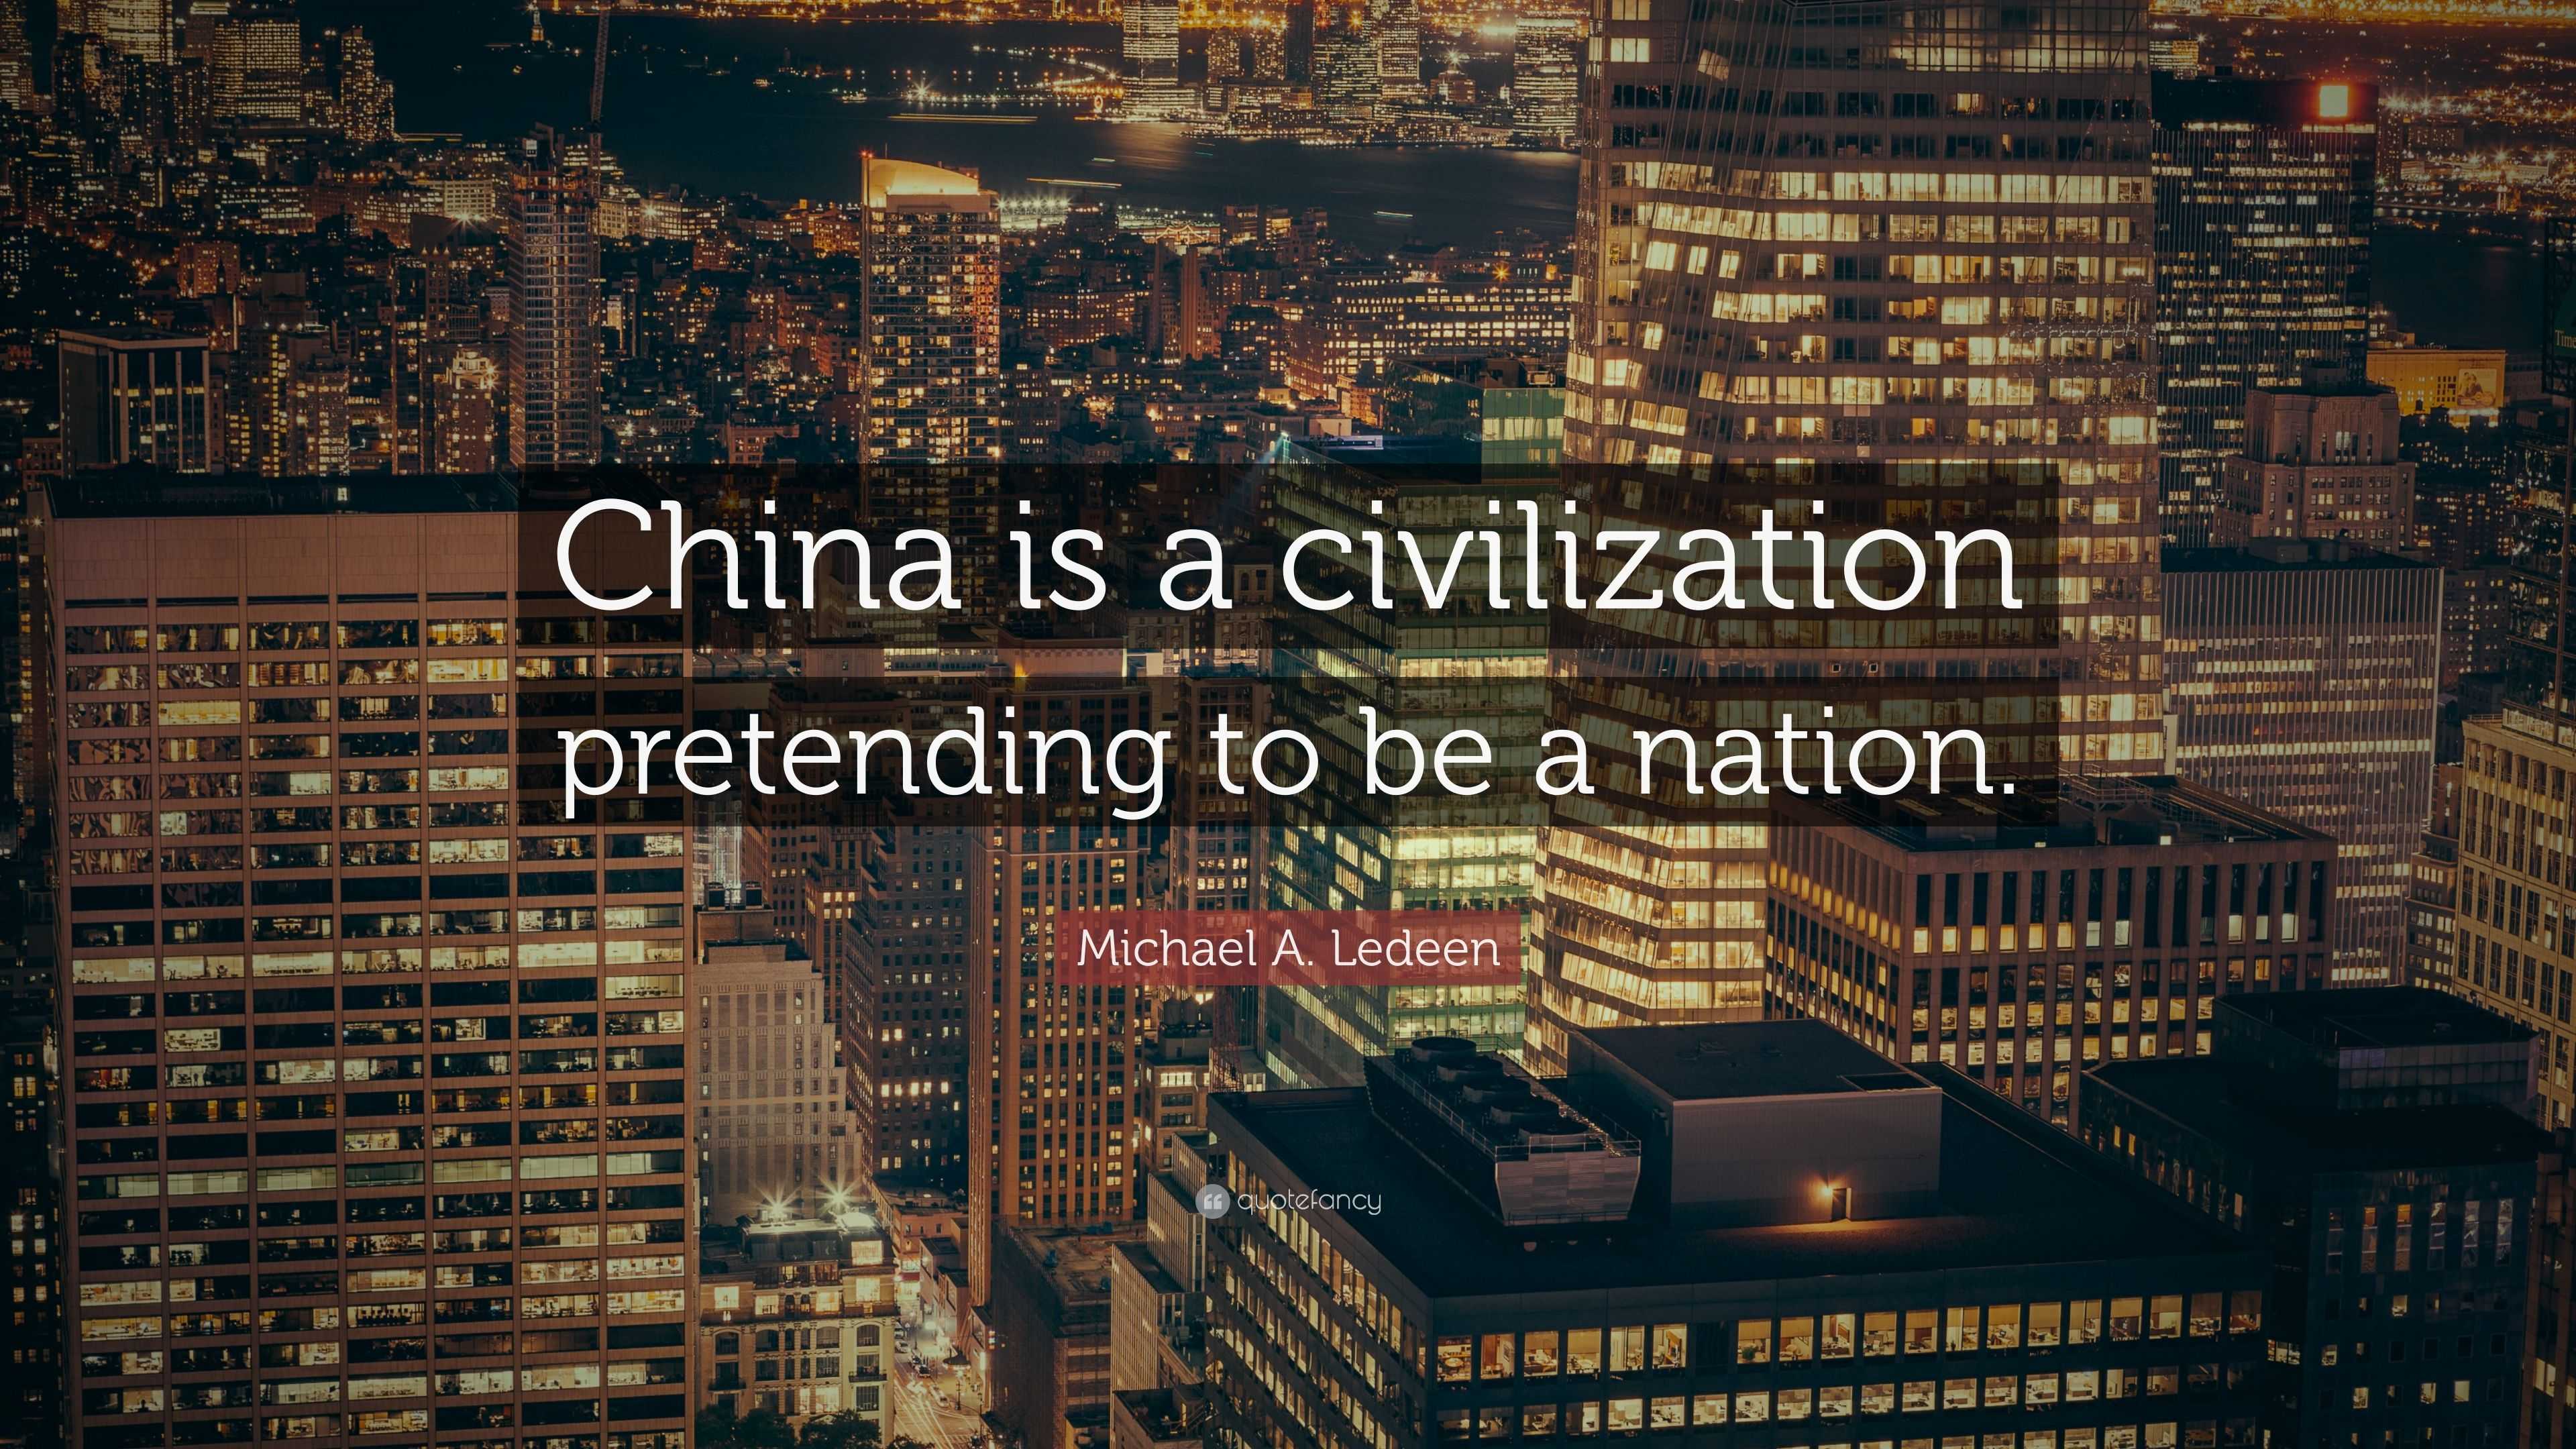 Michael Ledeen - China is a civilization pretending to be